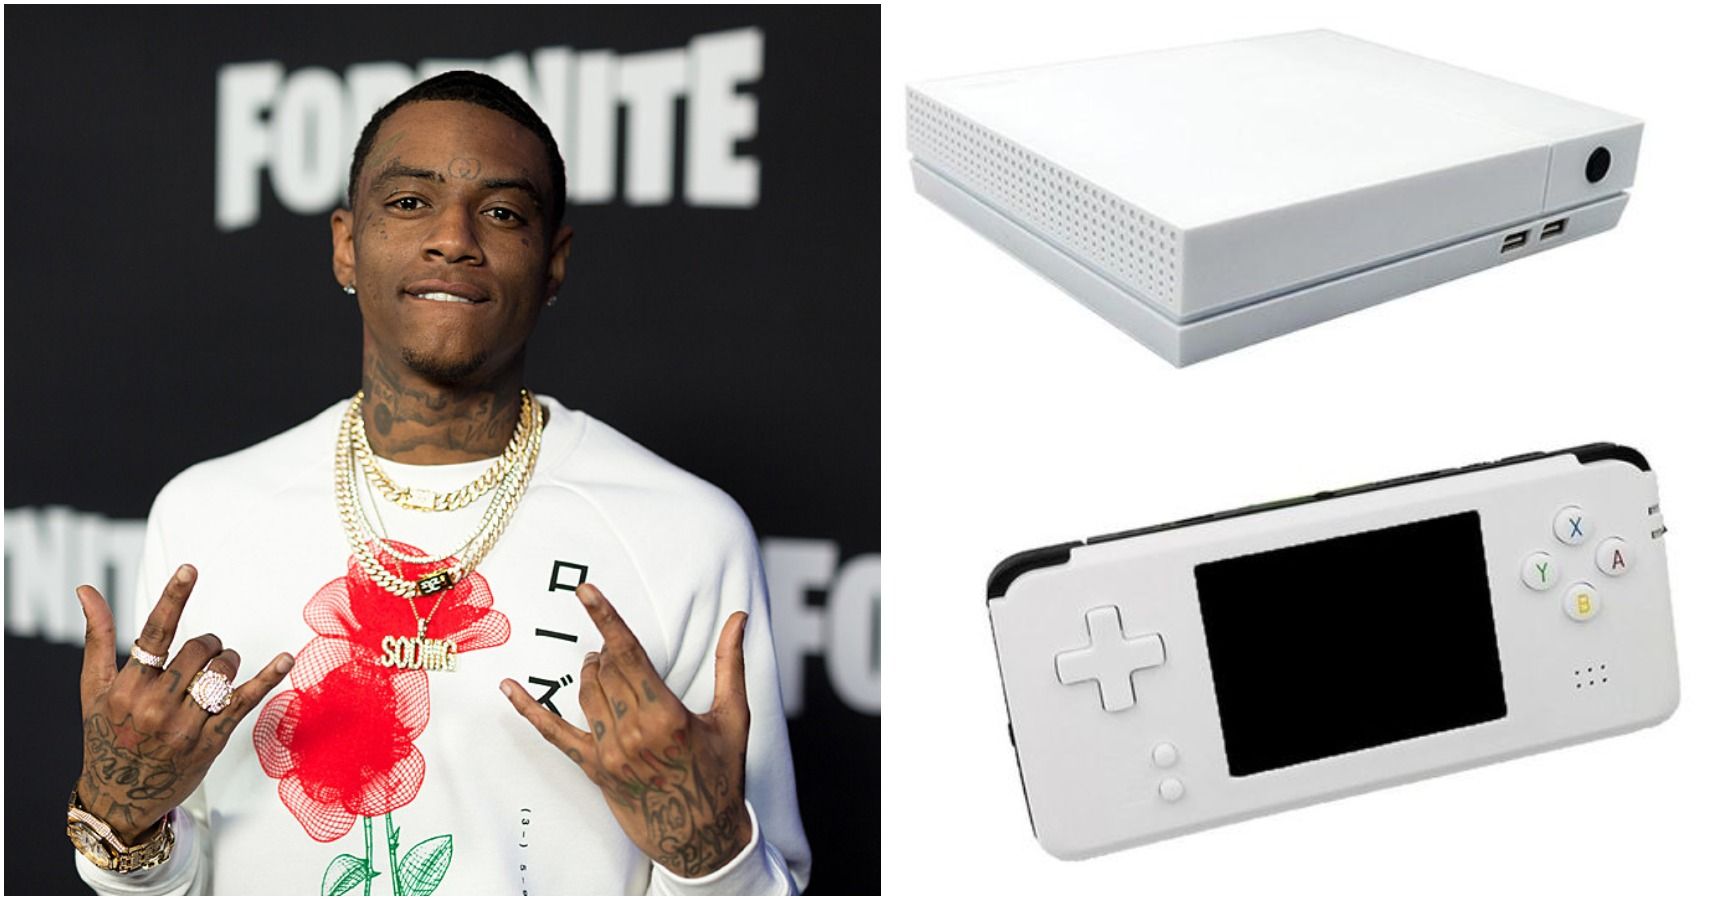 Just Got My Sales Report: Soulja Boy Says He's Sold 5,000,000 Consoles In December